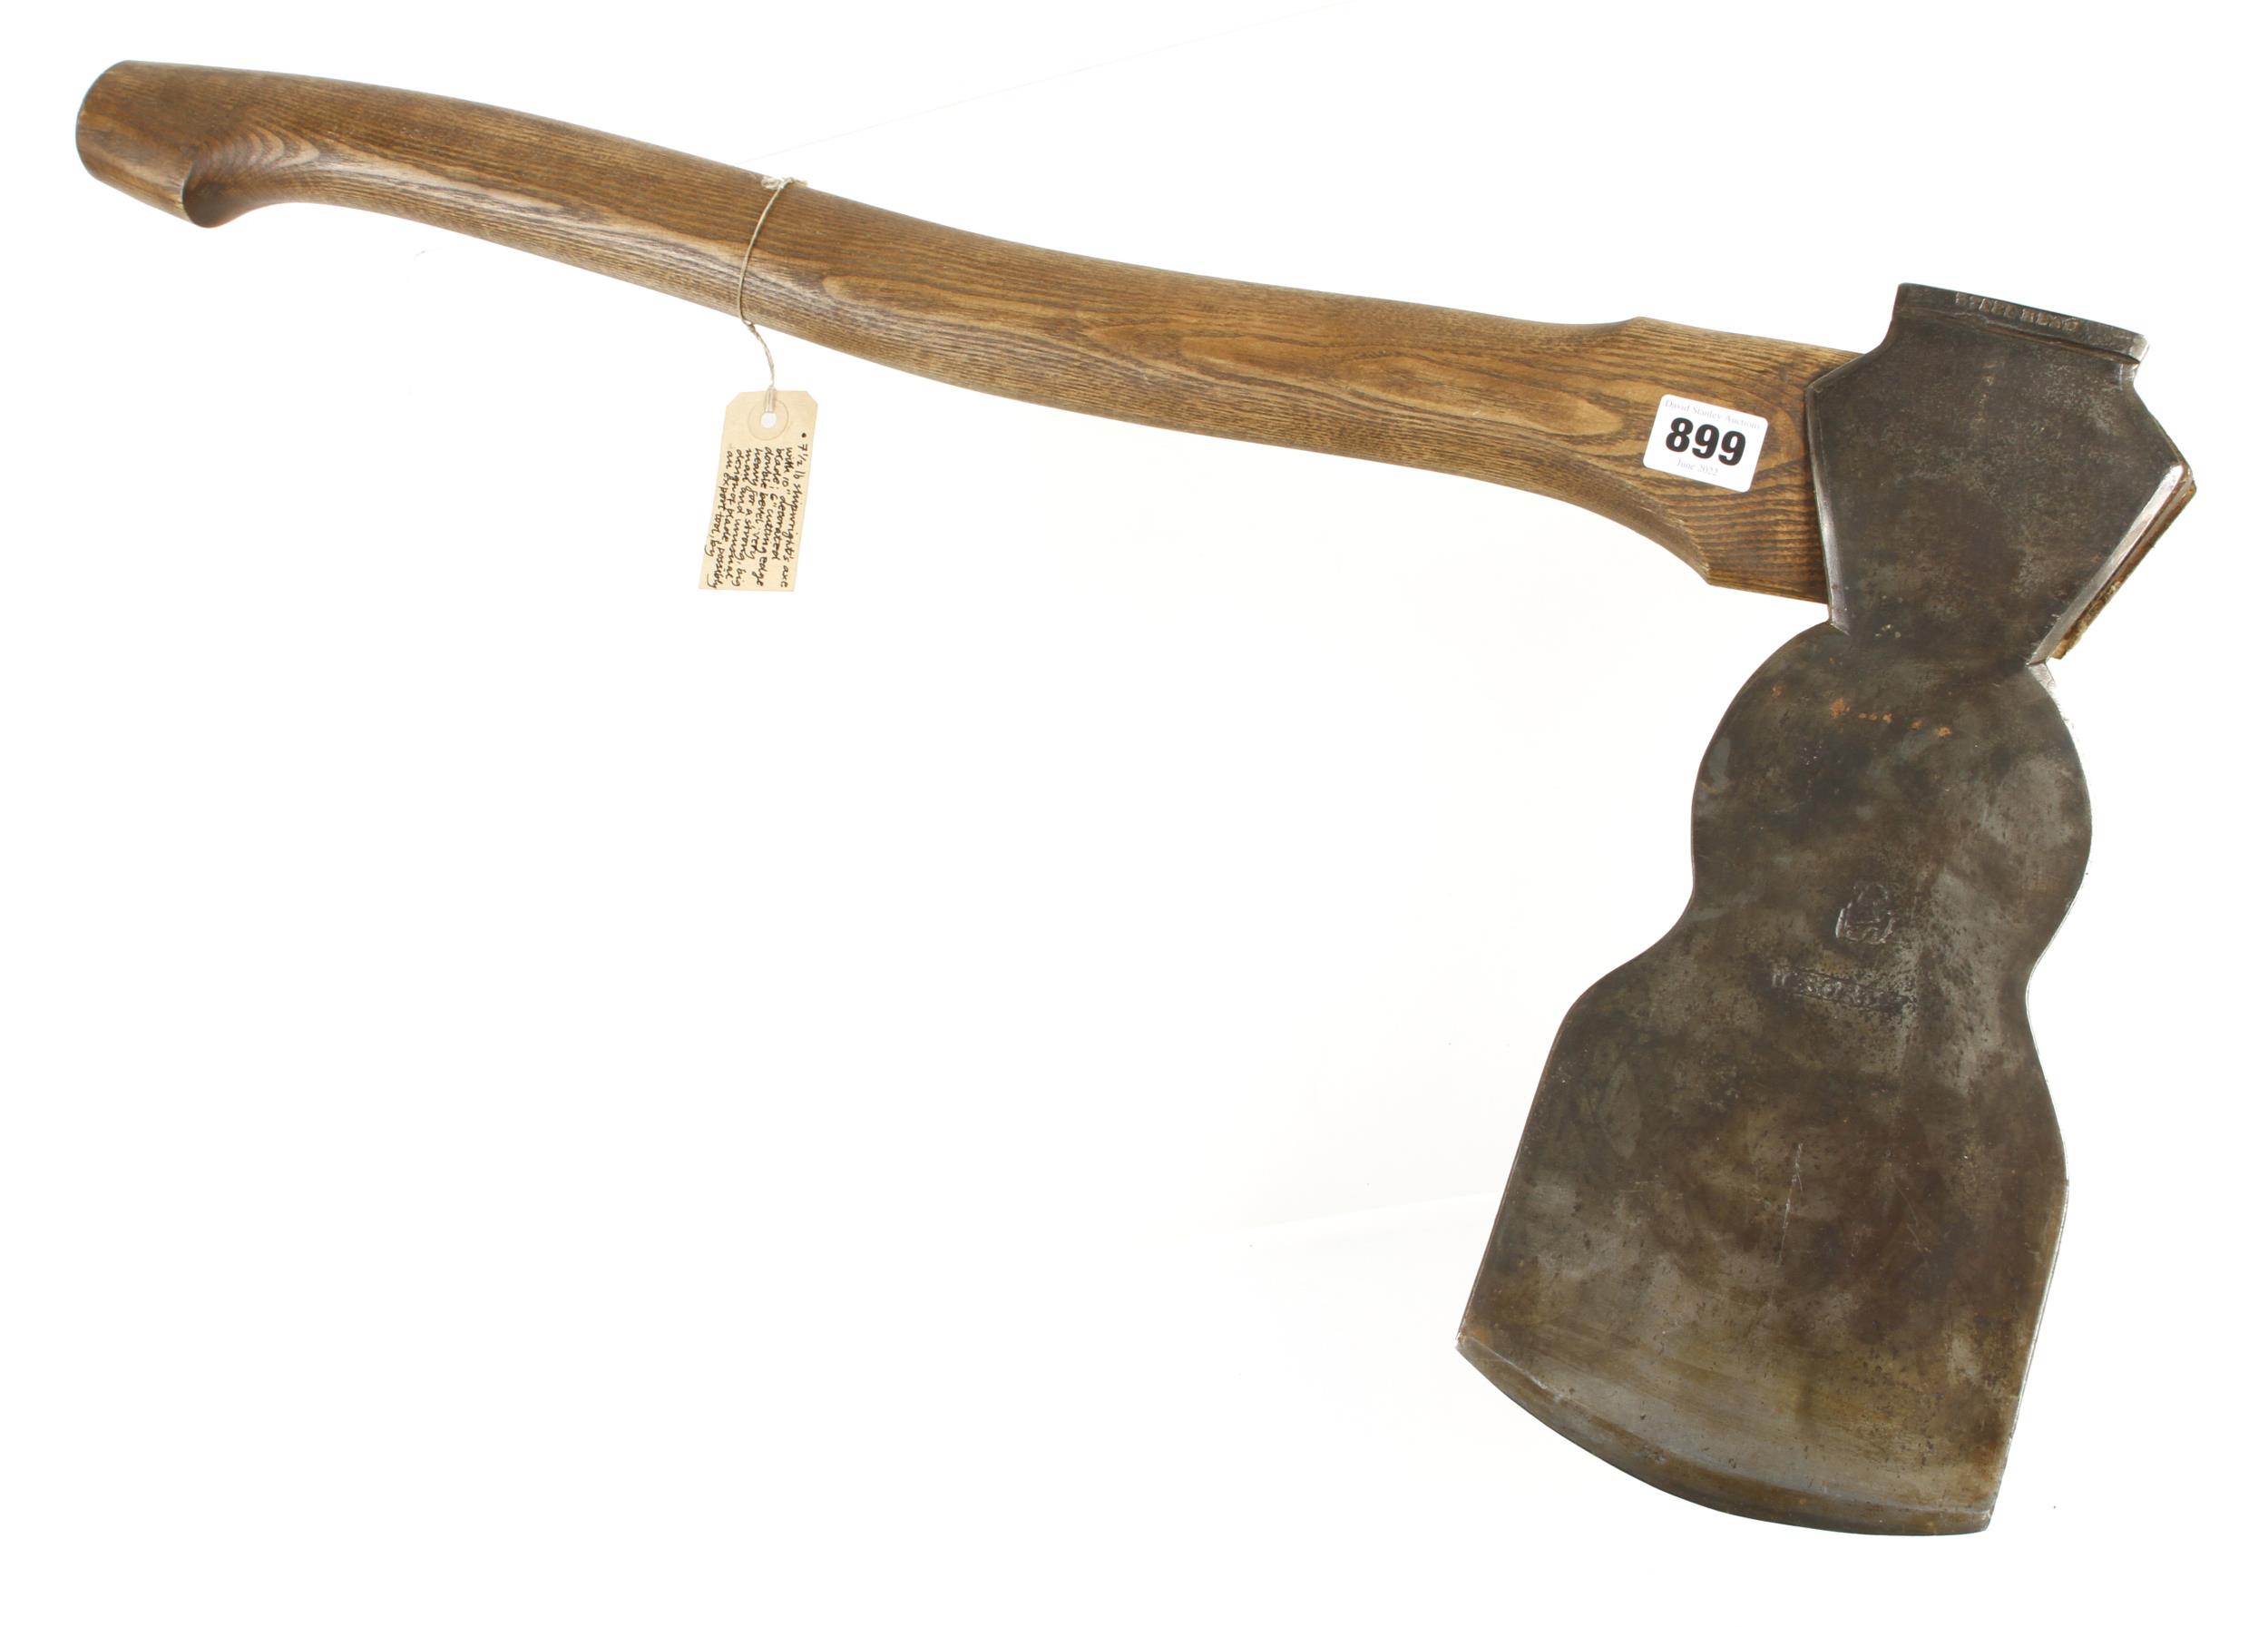 An unusual 14" shipwright's axe by SORBY with 6" edge G++